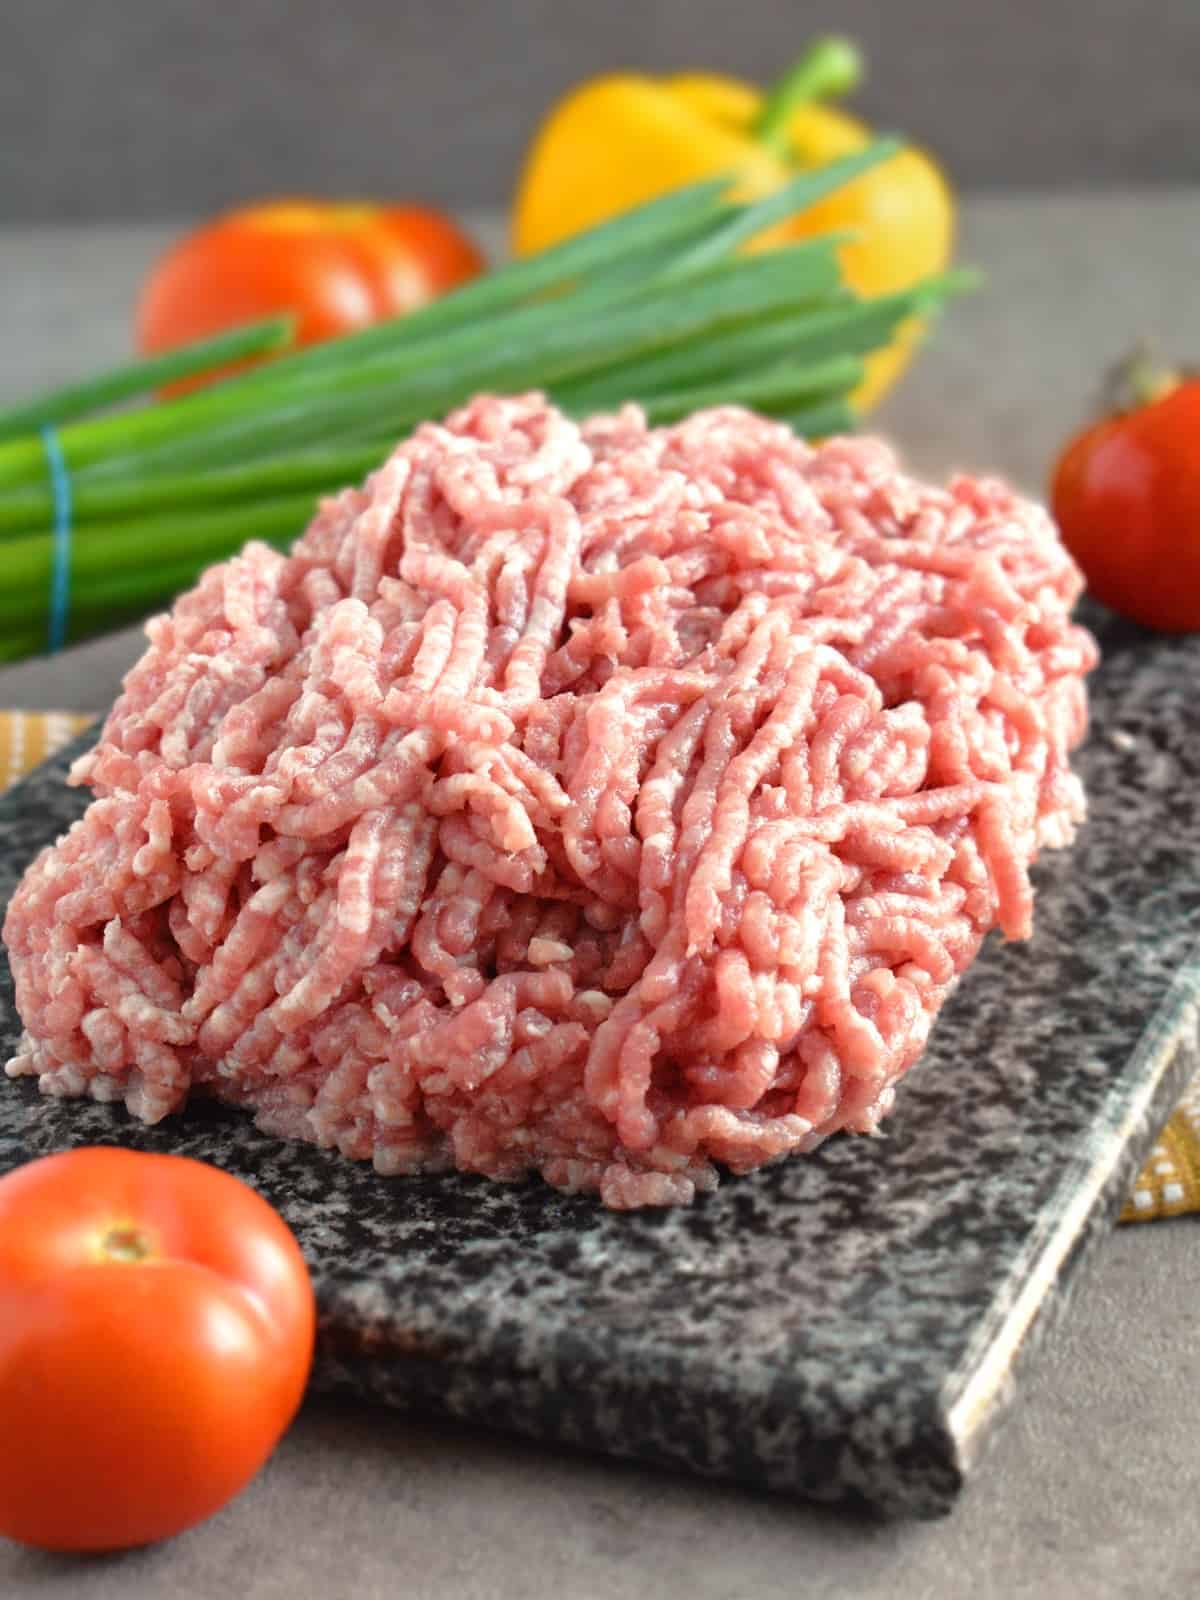 Buying, Grinding and Storing Ground Pork Meat: easy process to always have ground pork at home whenever you crave fresh meatballs that can be done in no time. | olgainthekitchen.com